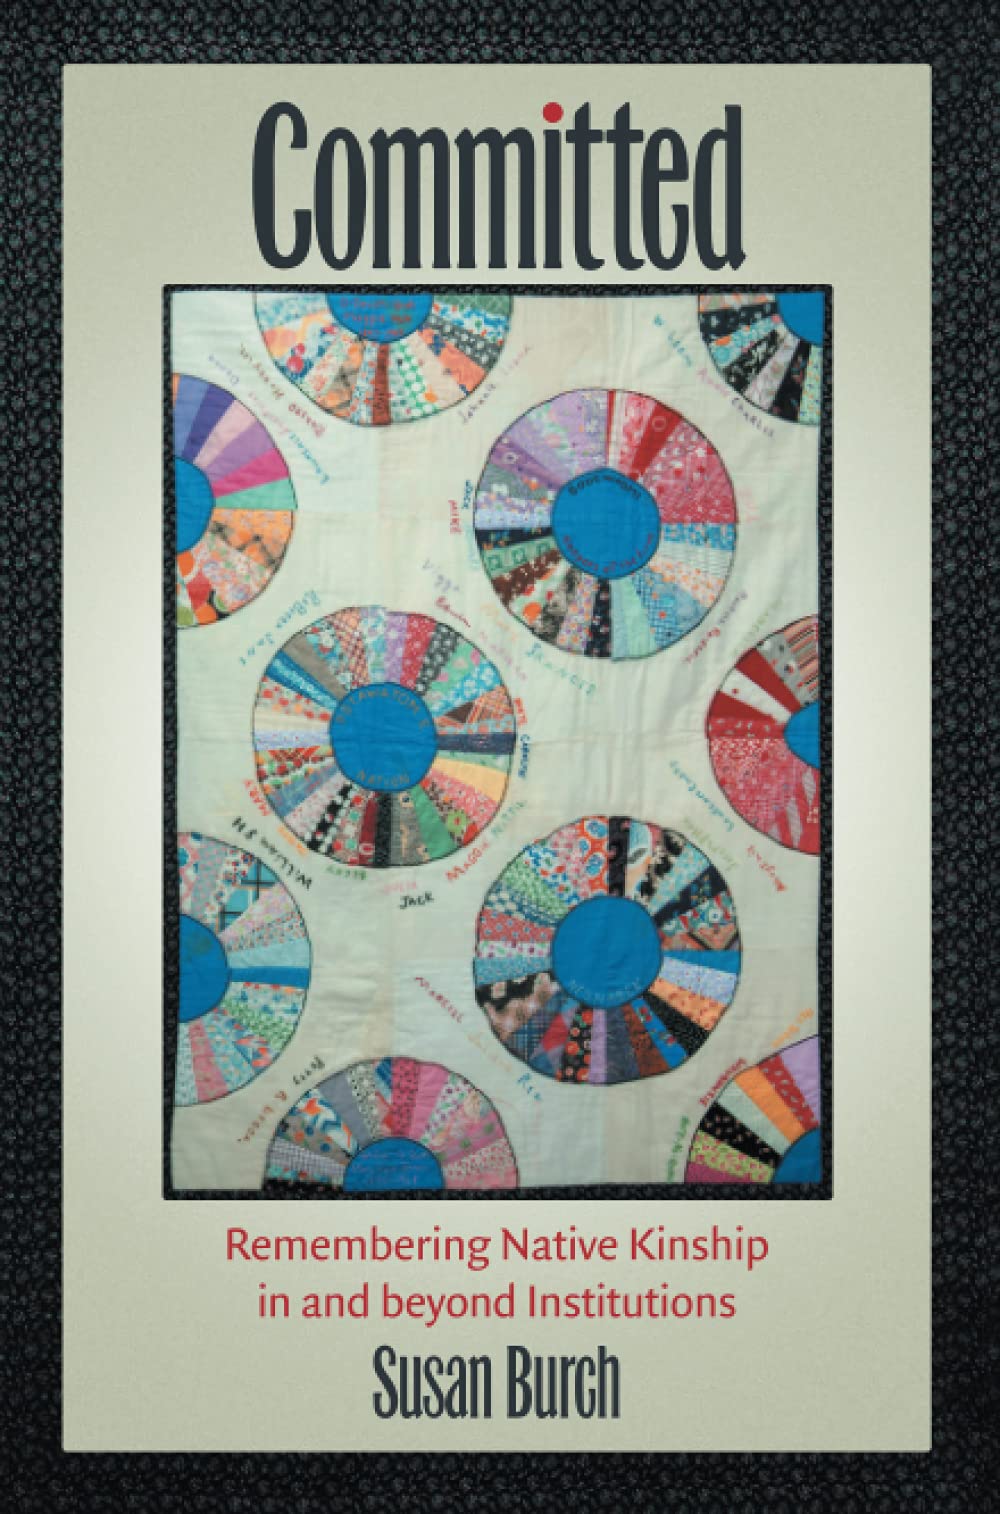 Committed: Remembering Native Kinship in and beyond Institutions by Susan Burch